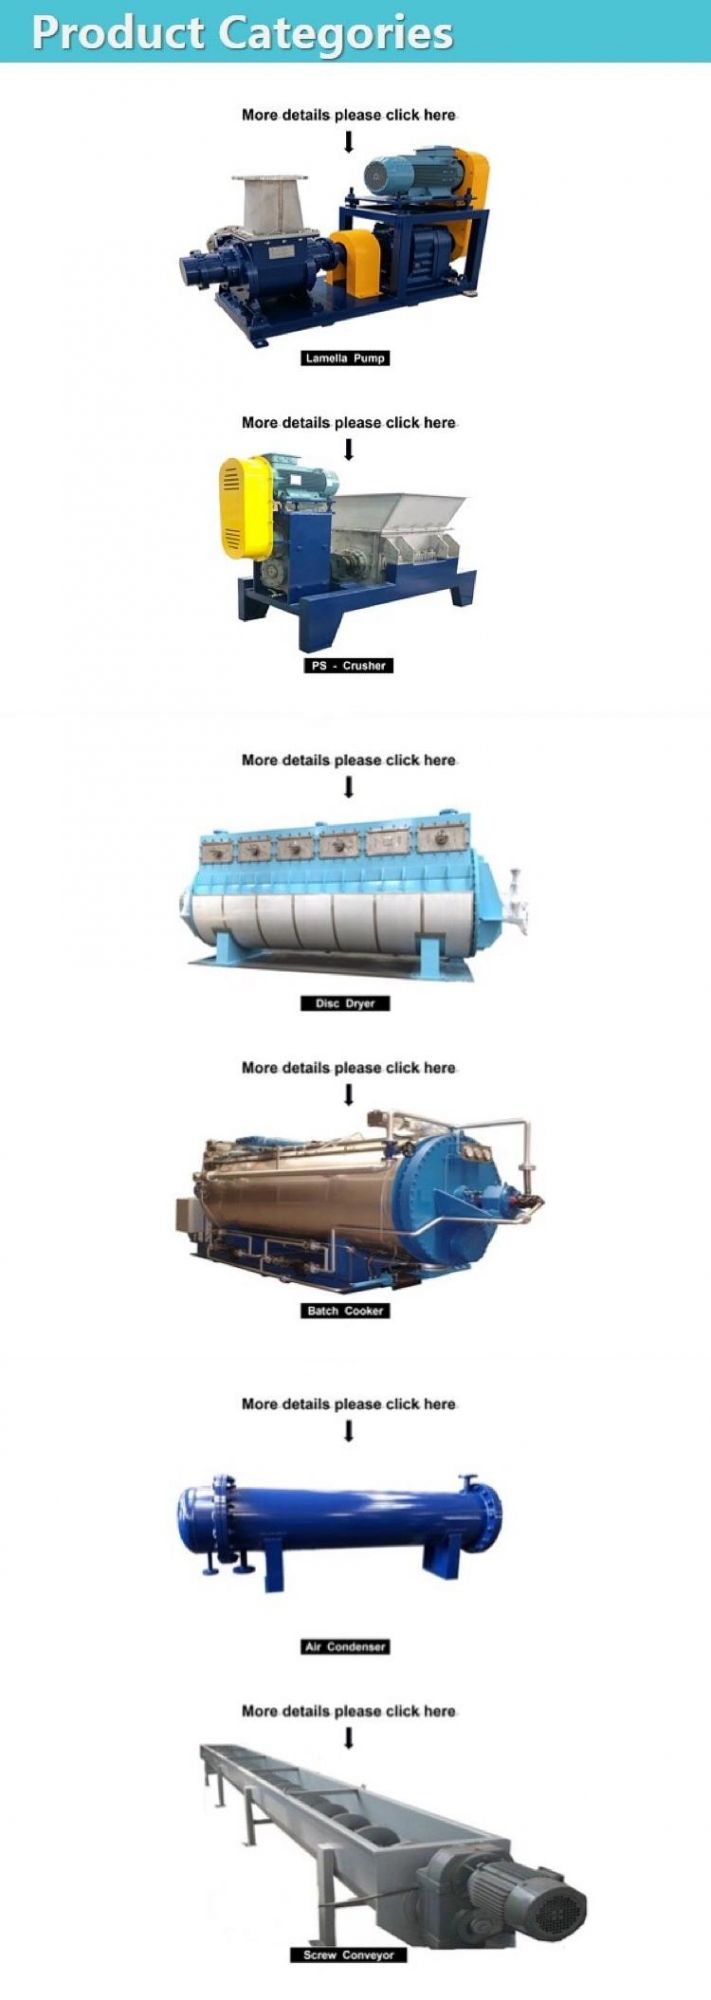 High Quality Lamella Pump for an Abattoir or Meat Process Plant